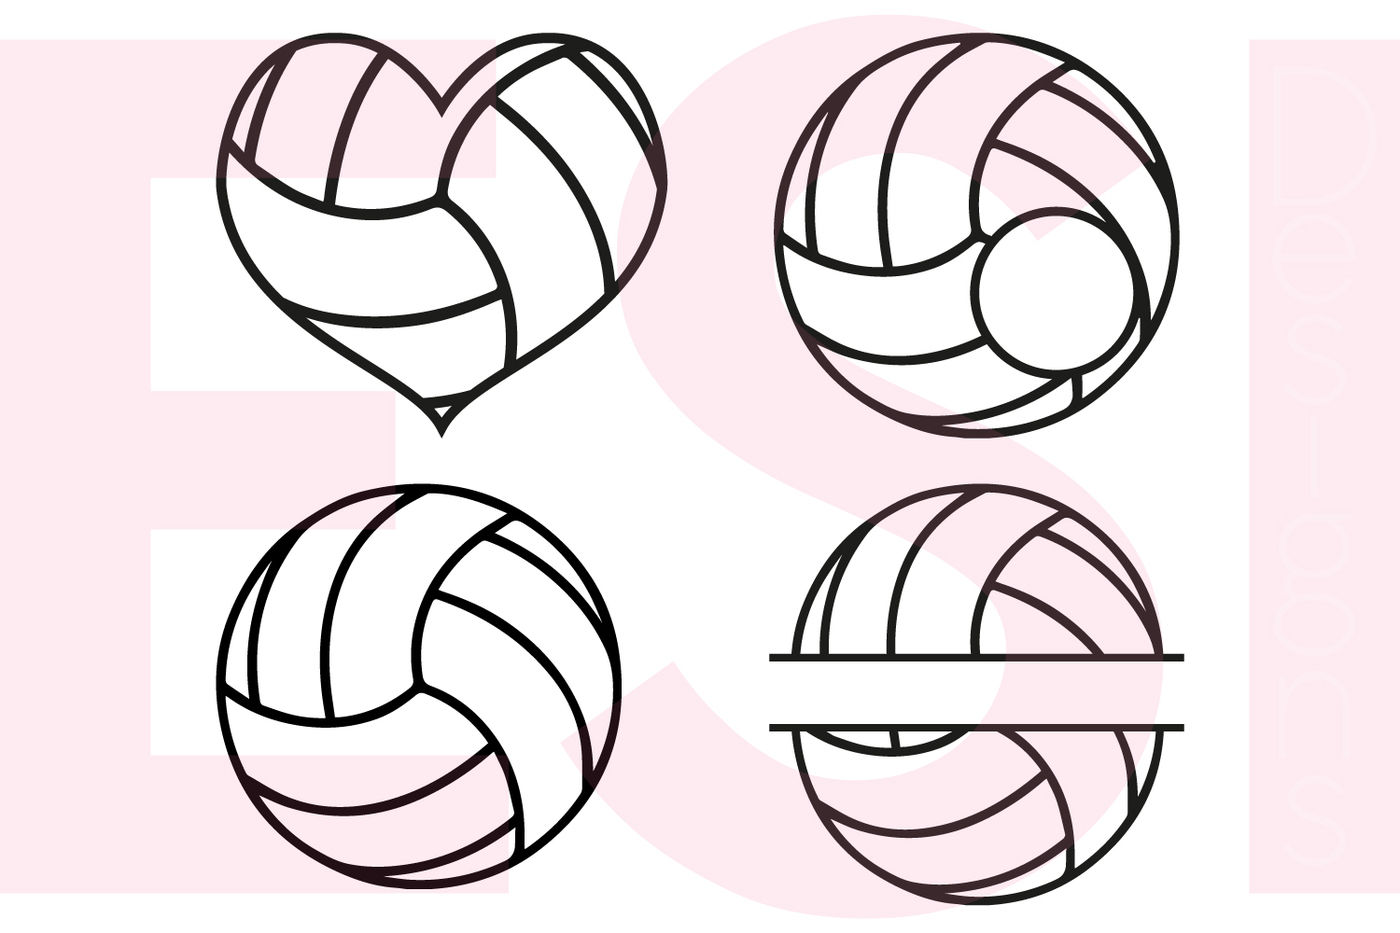 Volleyball Designs And Monograms Svg Dxf Eps Cutting Files By Esi Designs Thehungryjpeg Com